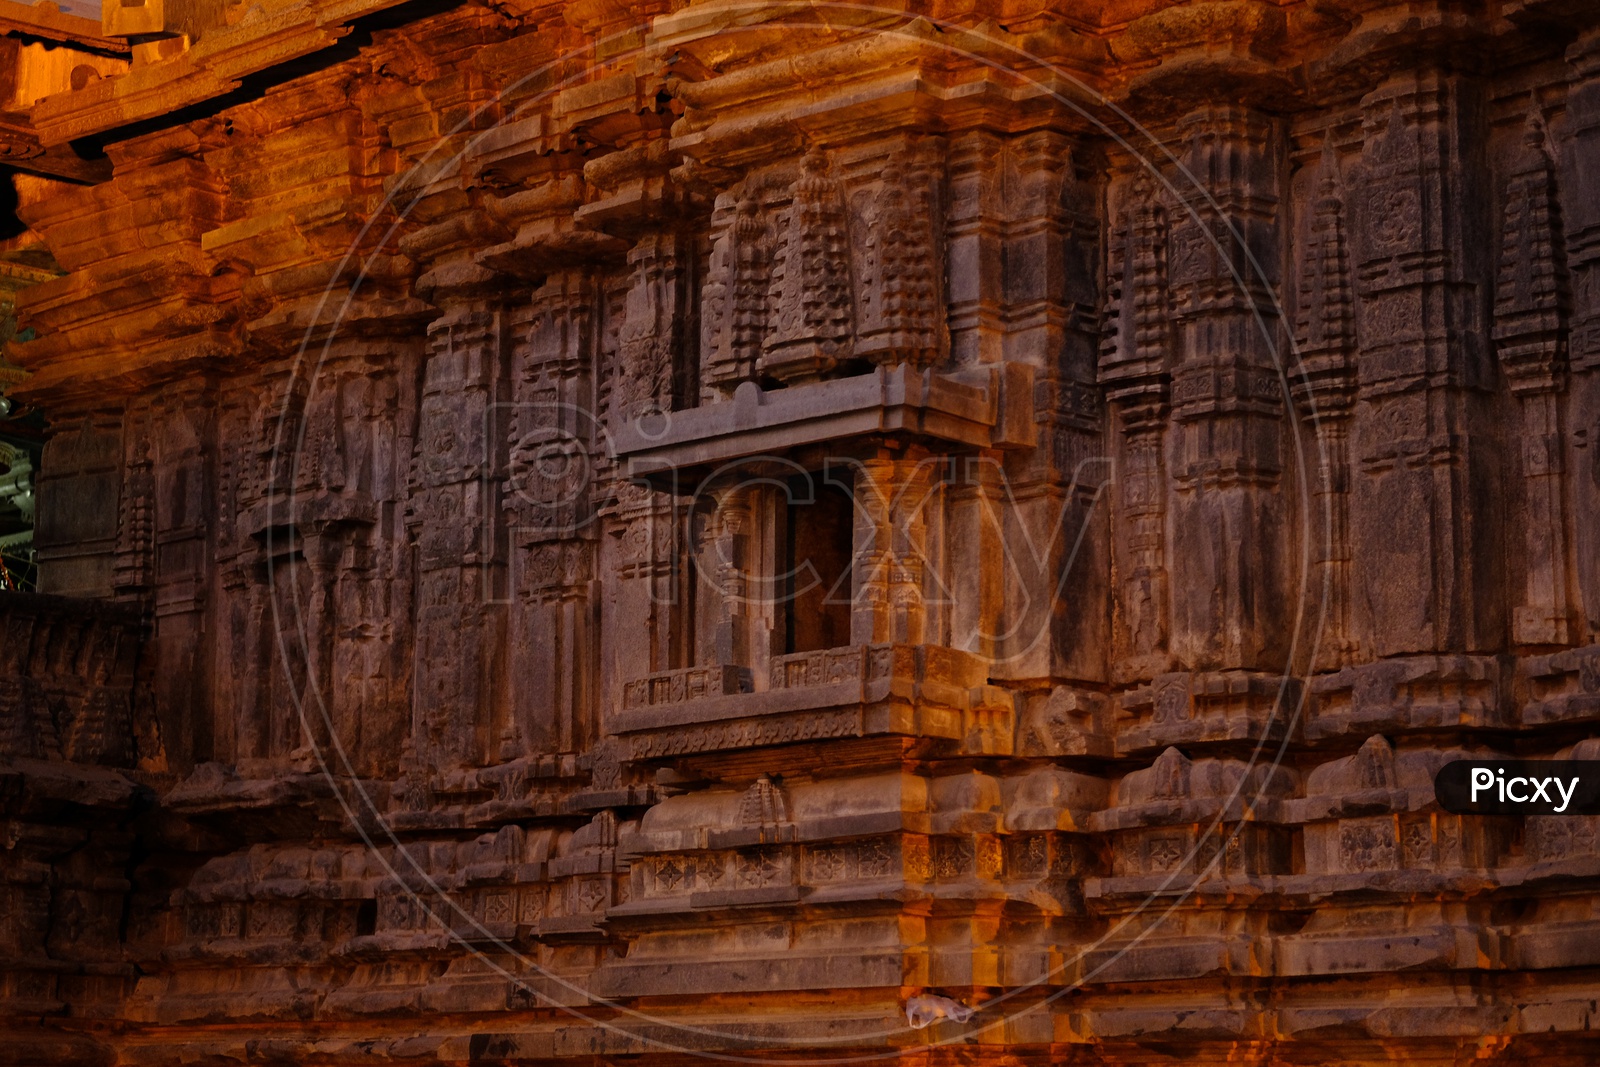 Architecture Of Ancient Hindu Temples With Carvings On temple Walls